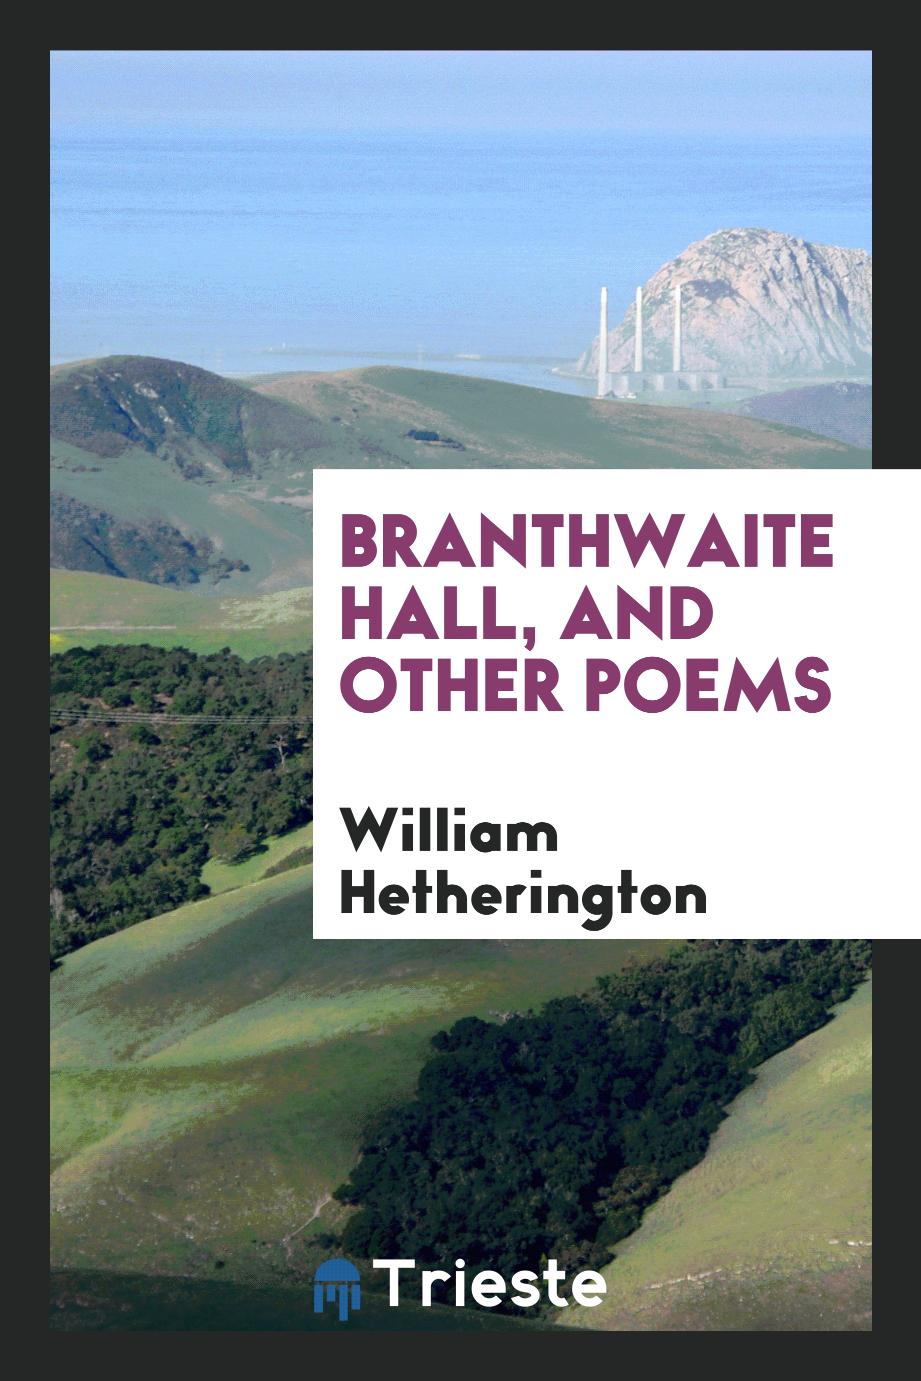 Branthwaite Hall, and Other Poems